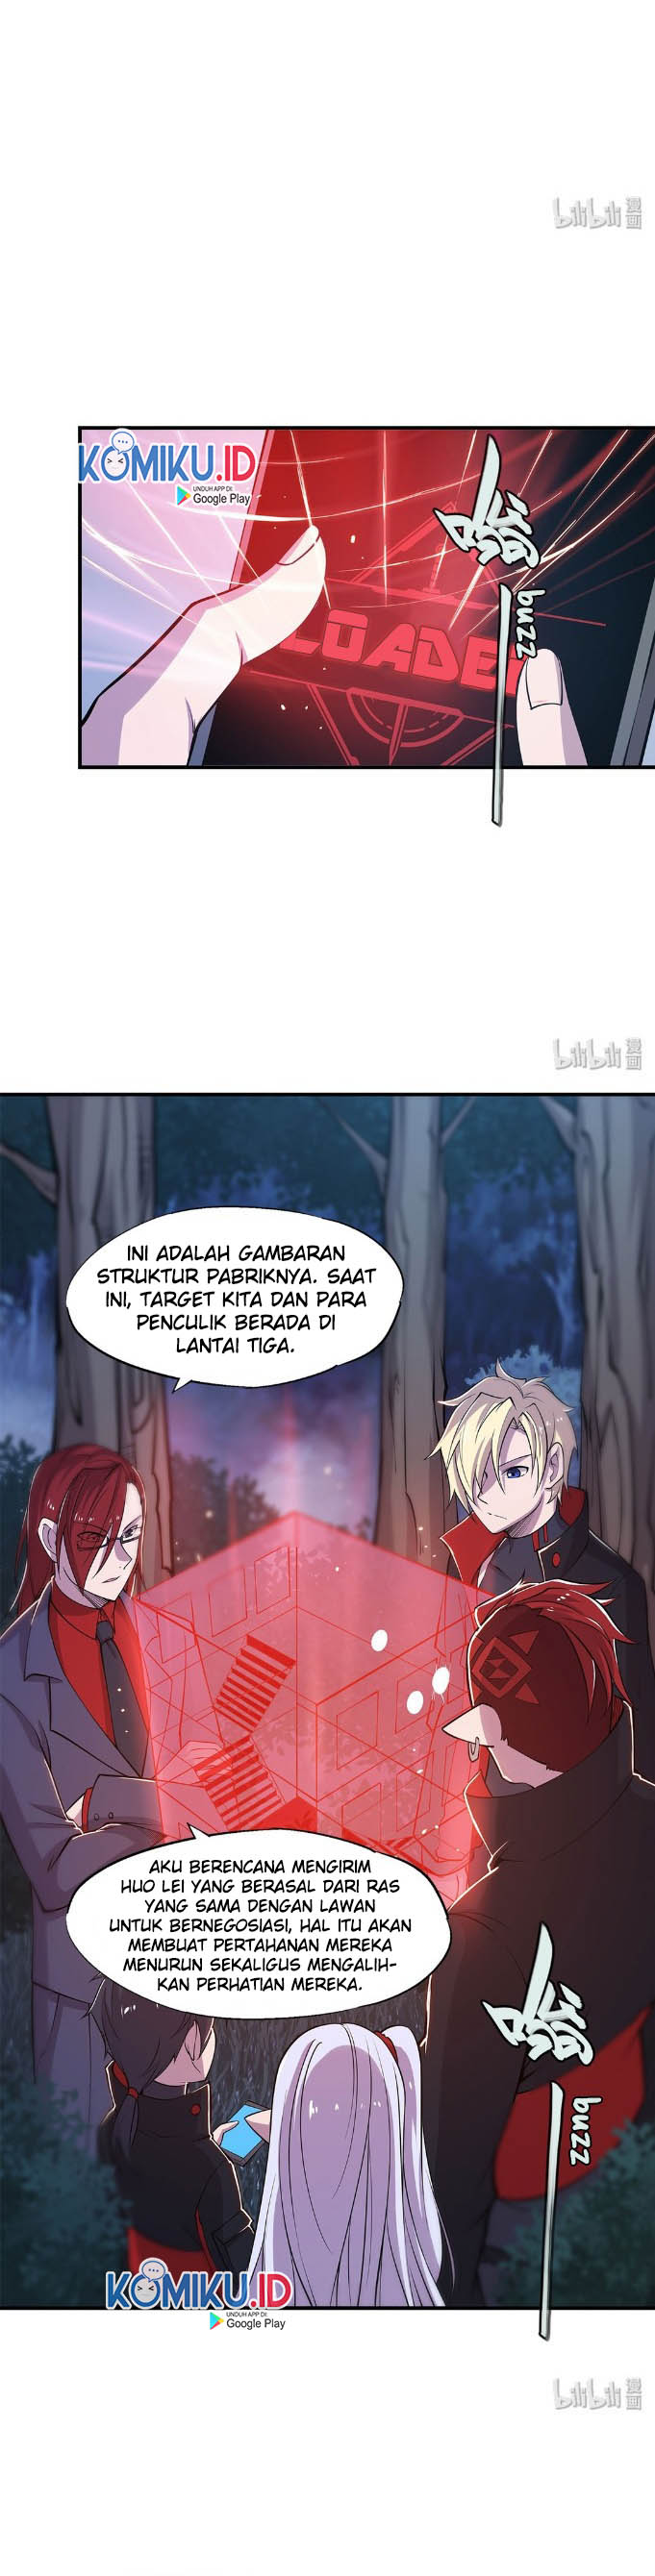 The Blood Princess And The Knight Chapter 28 3